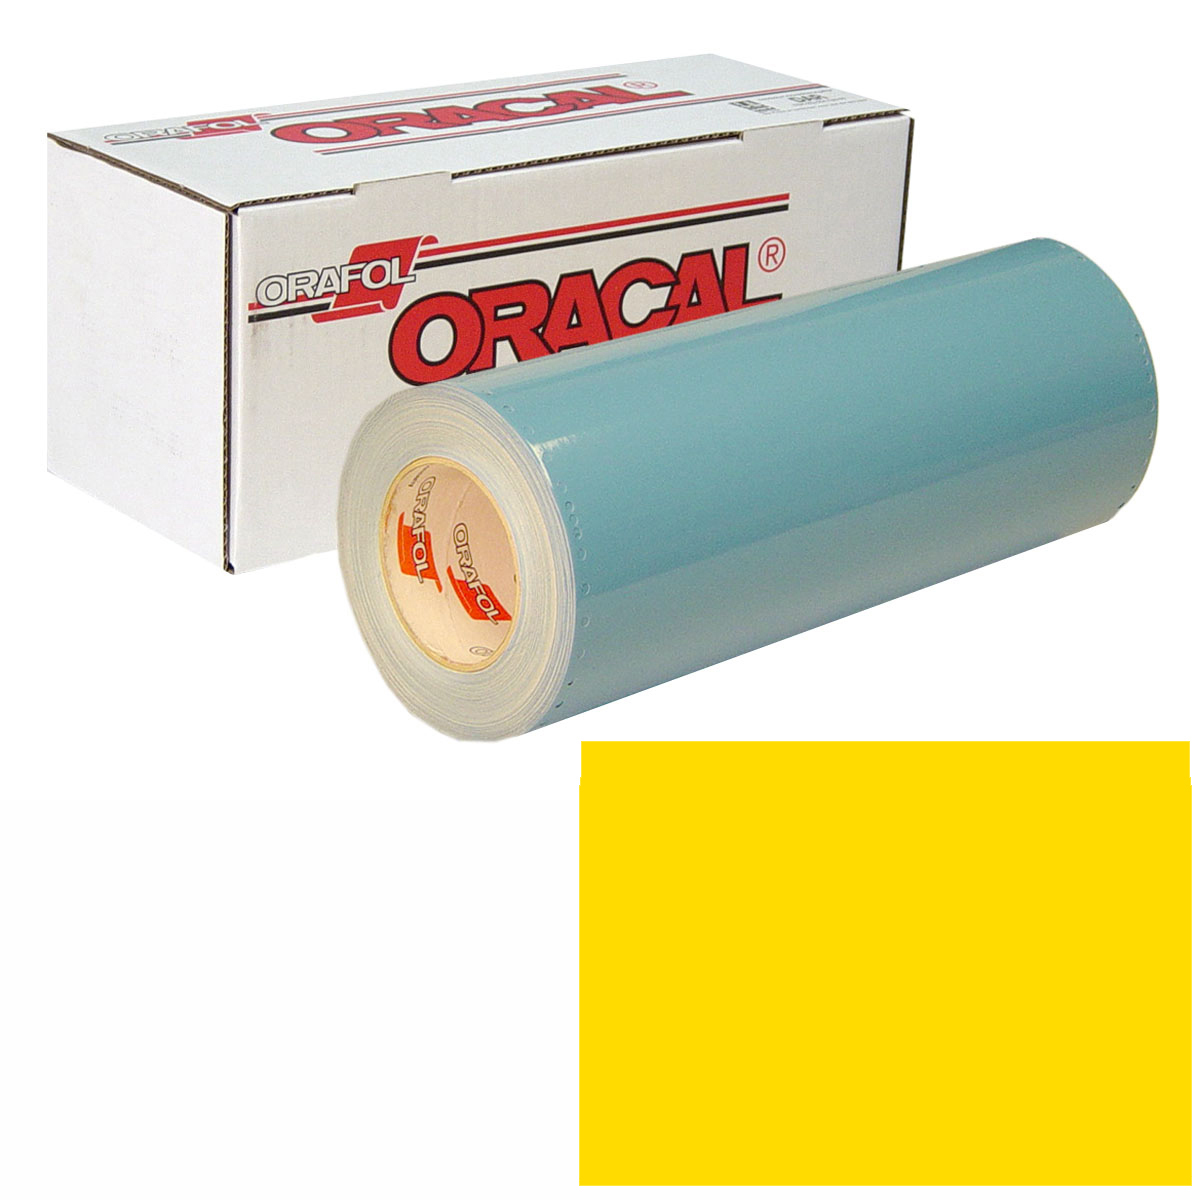 ORACAL 751 15in X 50yd 021 Yellow